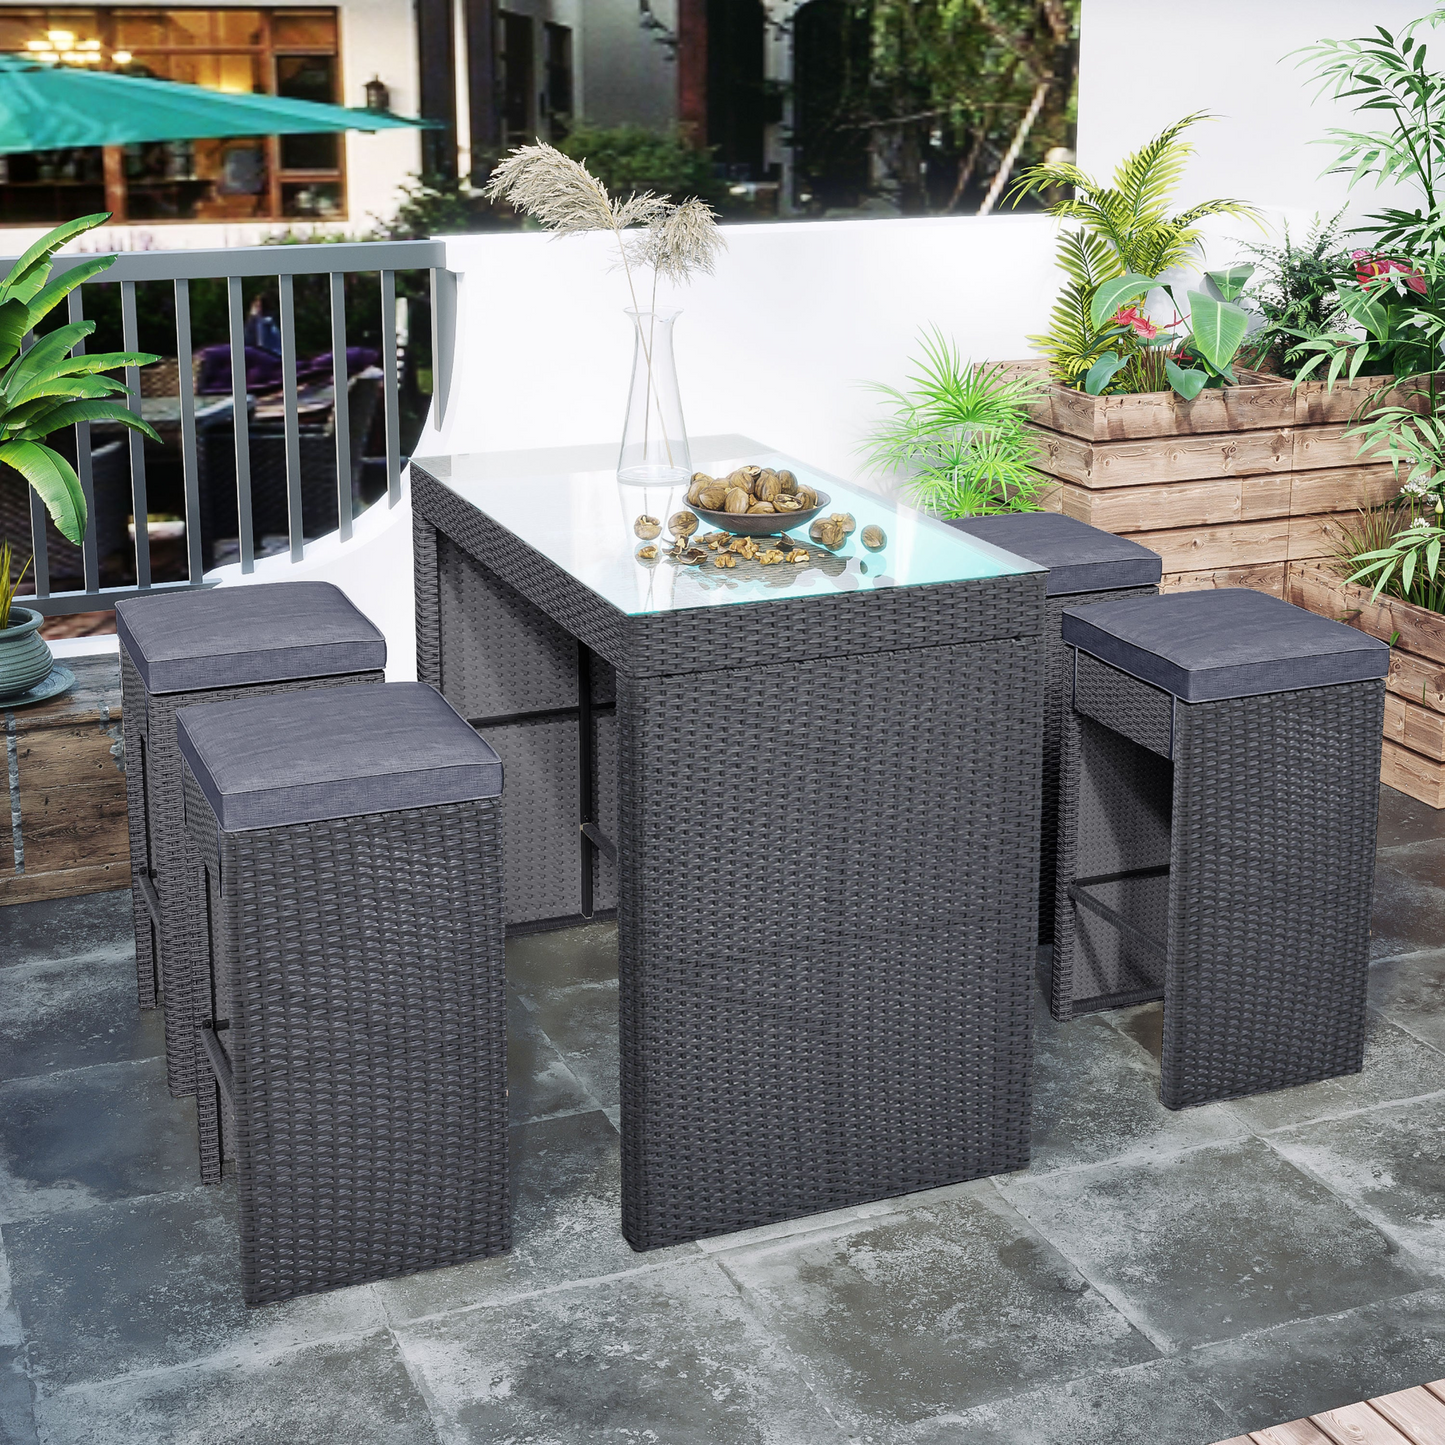 TOPMAX 5-Piece Rattan Patio Furniture Set with Bar Dining Table (Gray)